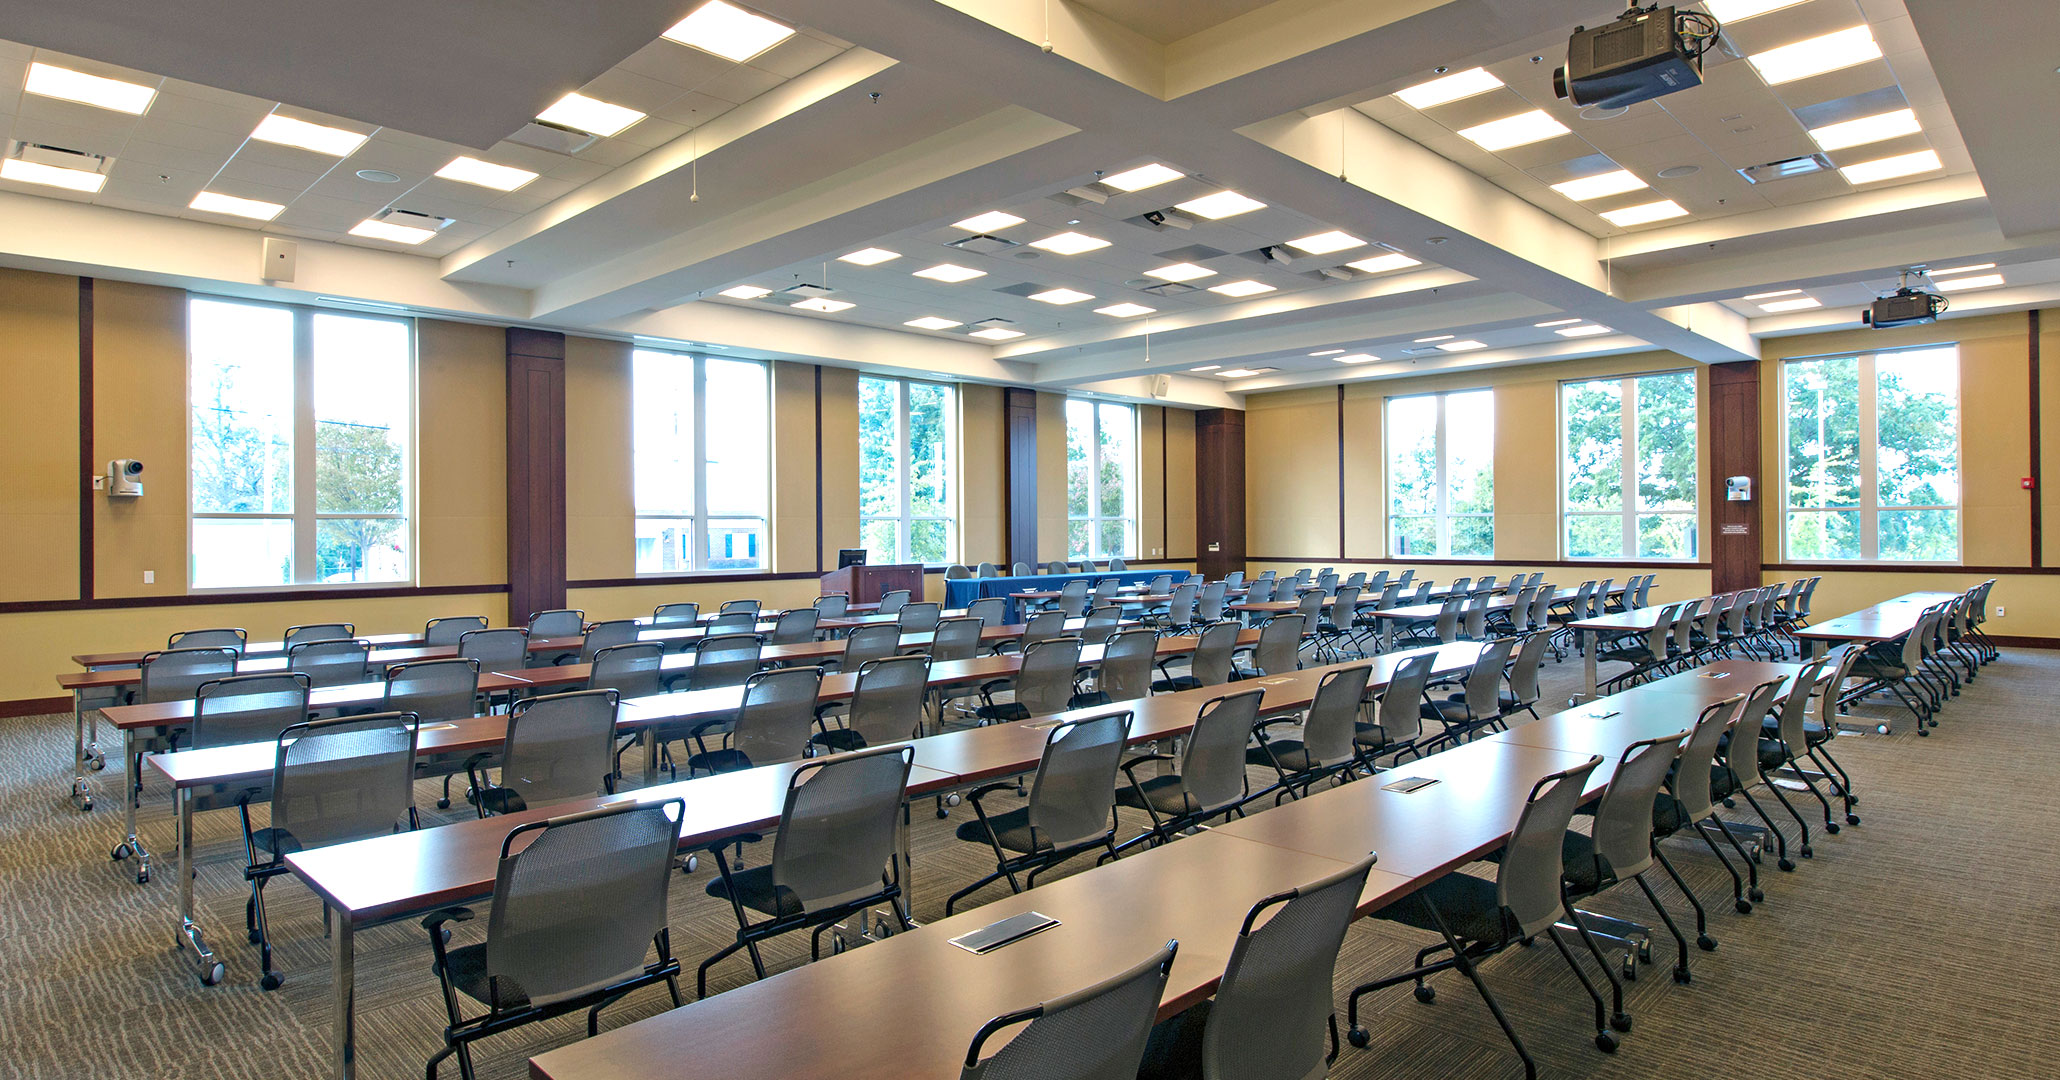 Boudreaux architects worked with the SC Bar Association to provide architectural design services.